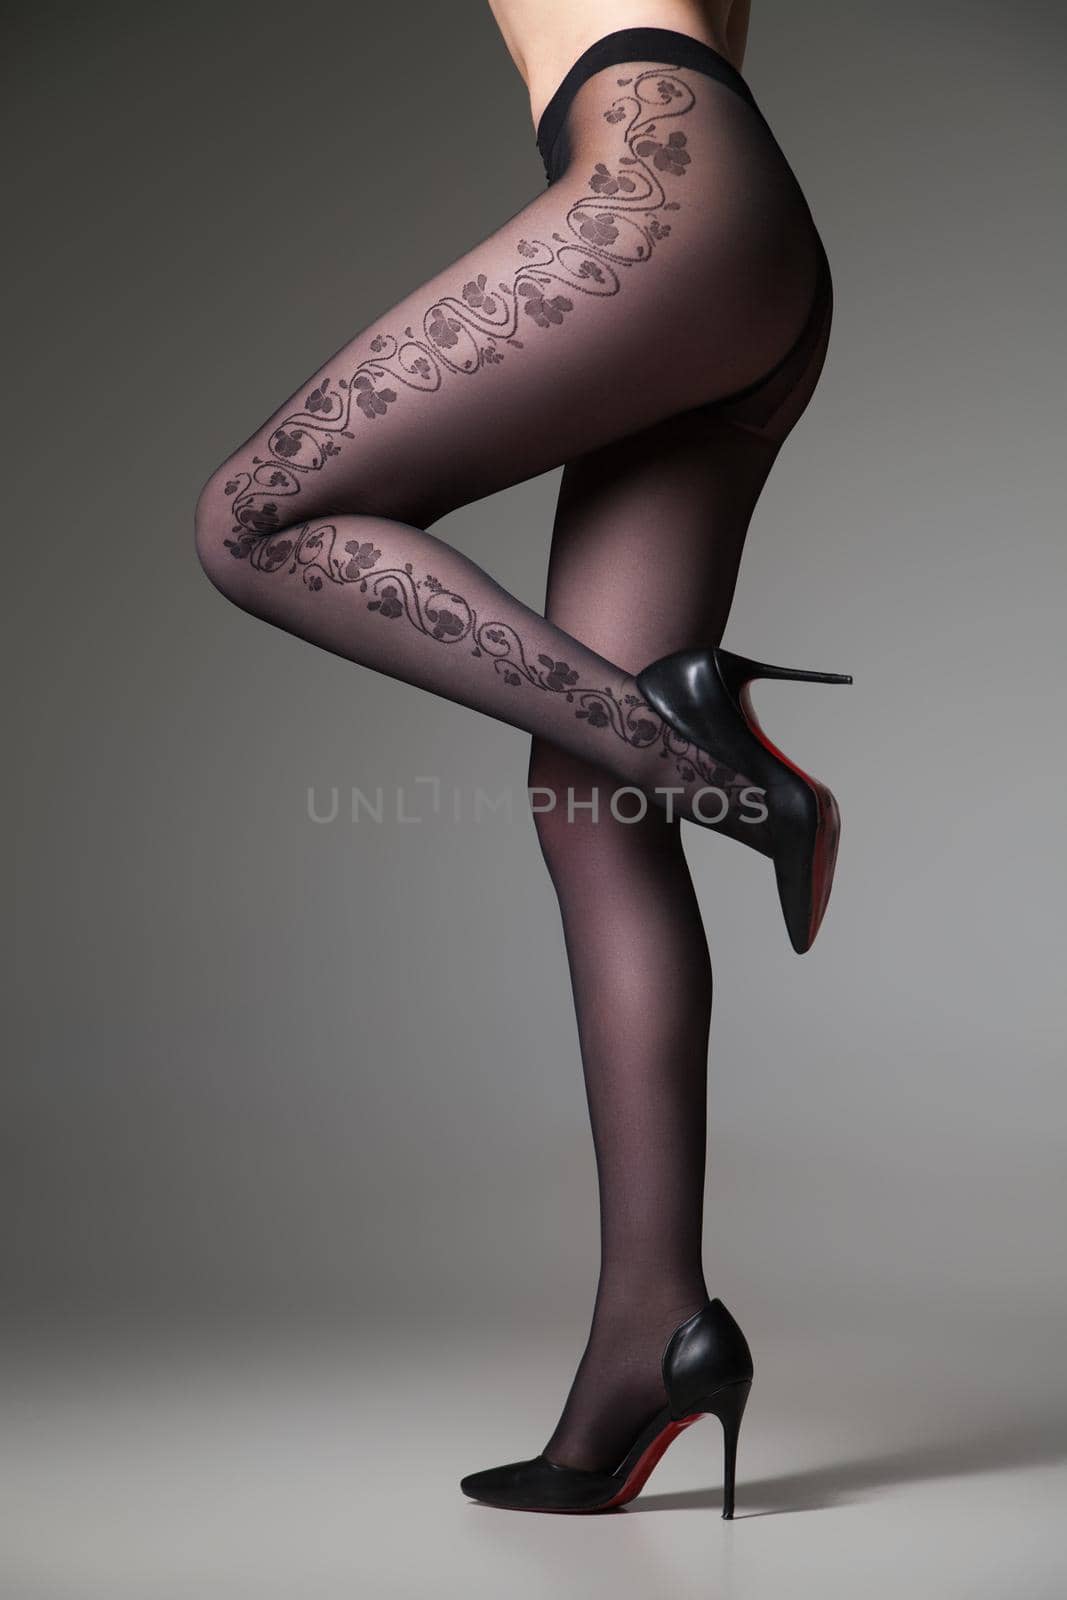 Vertical studio crop shot of female with on leg up posing in tights.